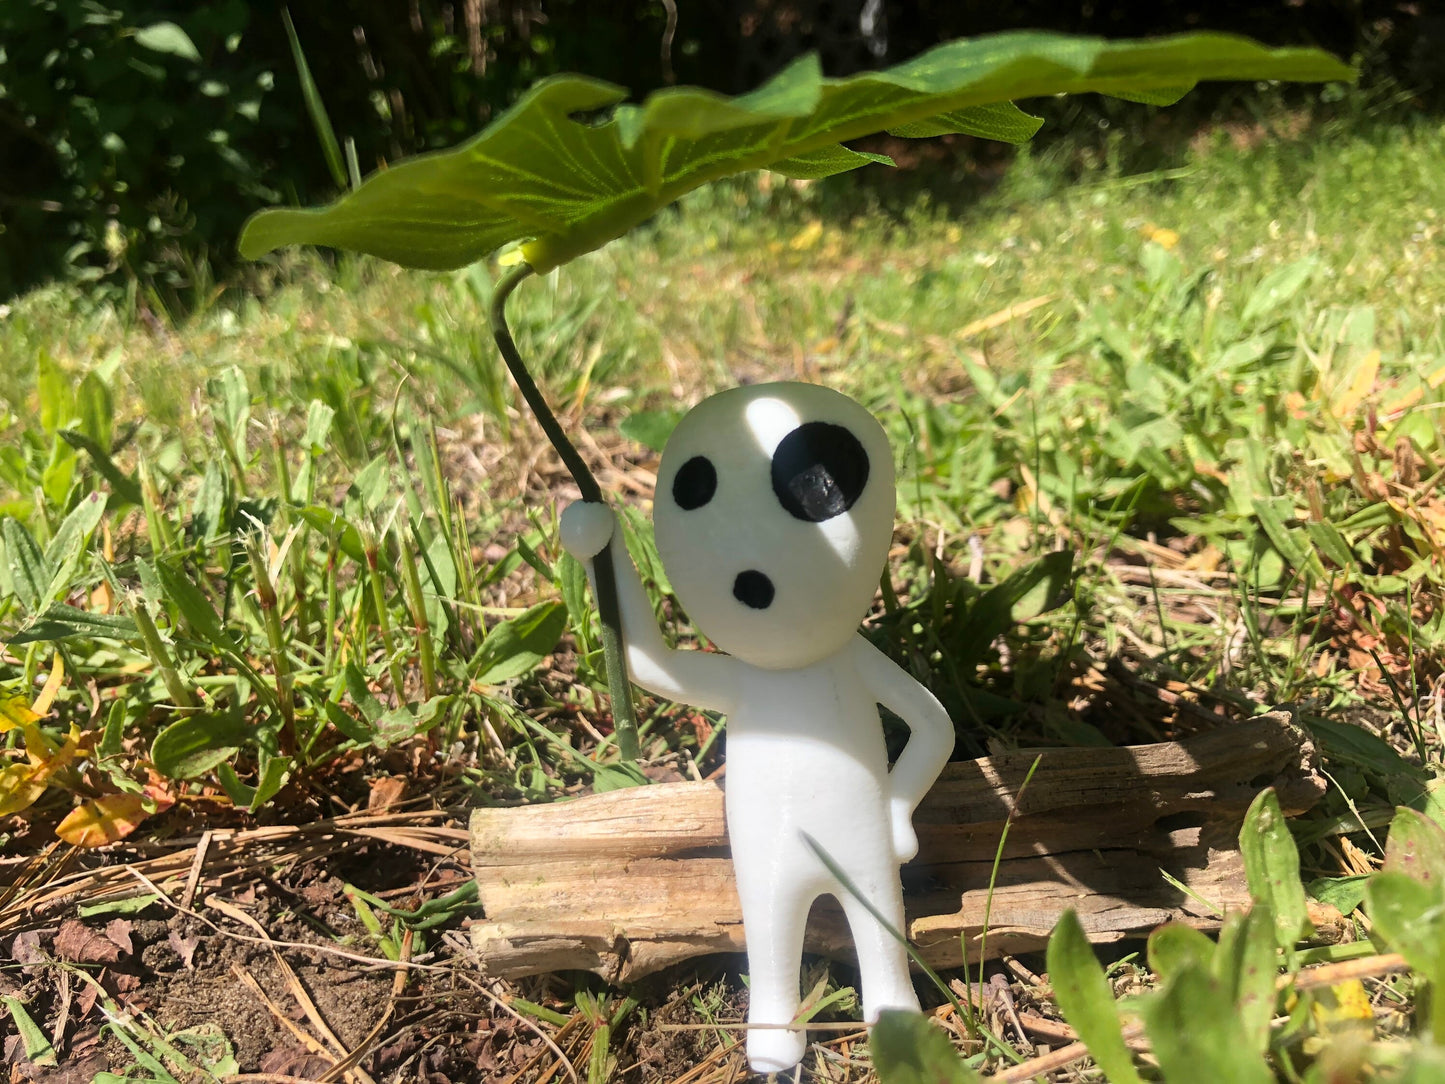 New Umbrella Forest Spirit - We Rattle! - Kodama -  Each one has a unique sound- 3 Inches Tall